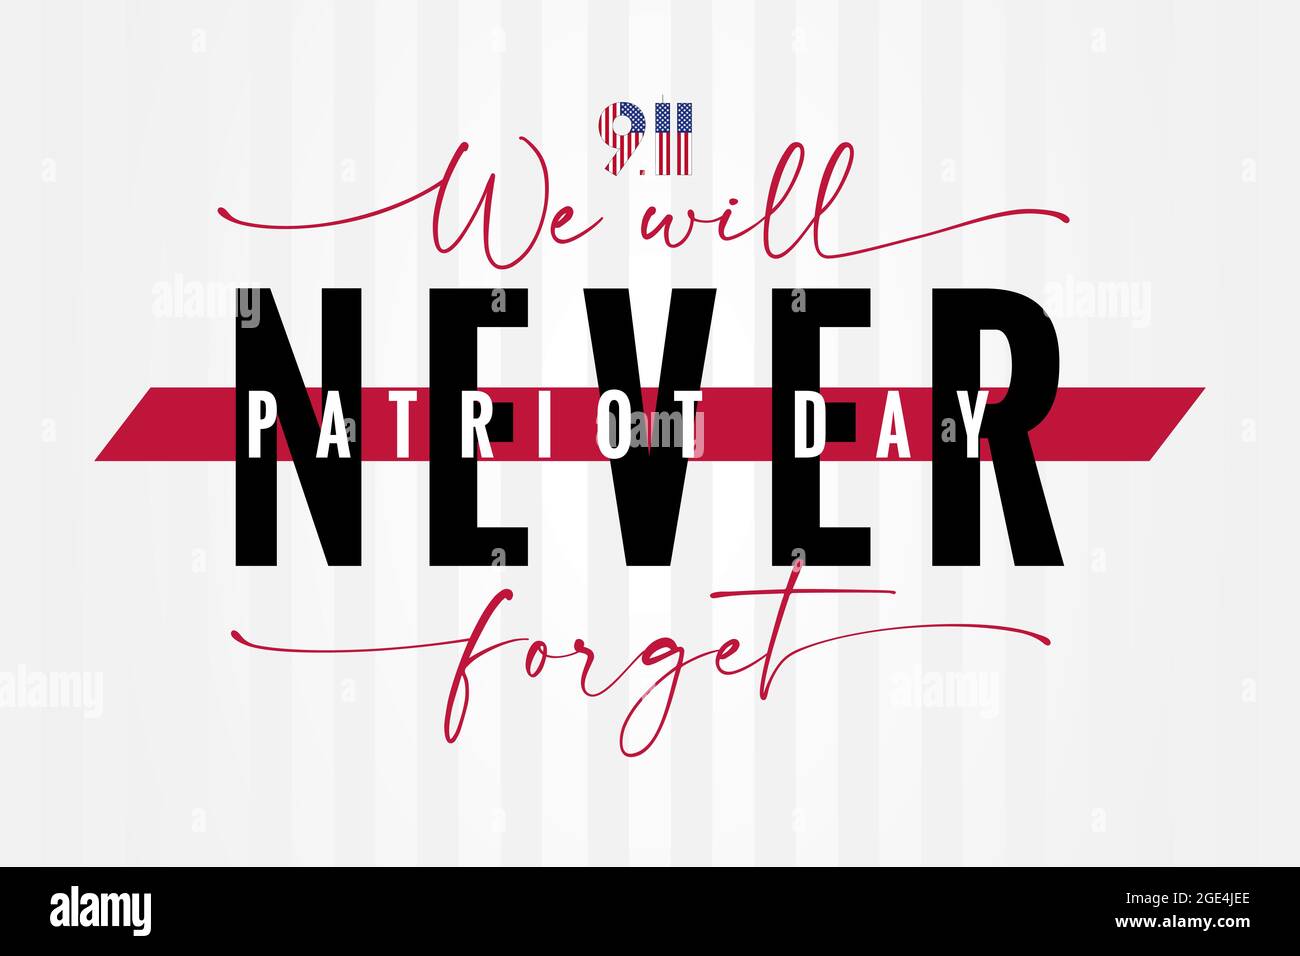 9/11, We will NEVER Forget Patriot Day USA Lettering Poster. National Day of Remembrance, 11. September USA Typografie Vektor Hintergrund Stock Vektor